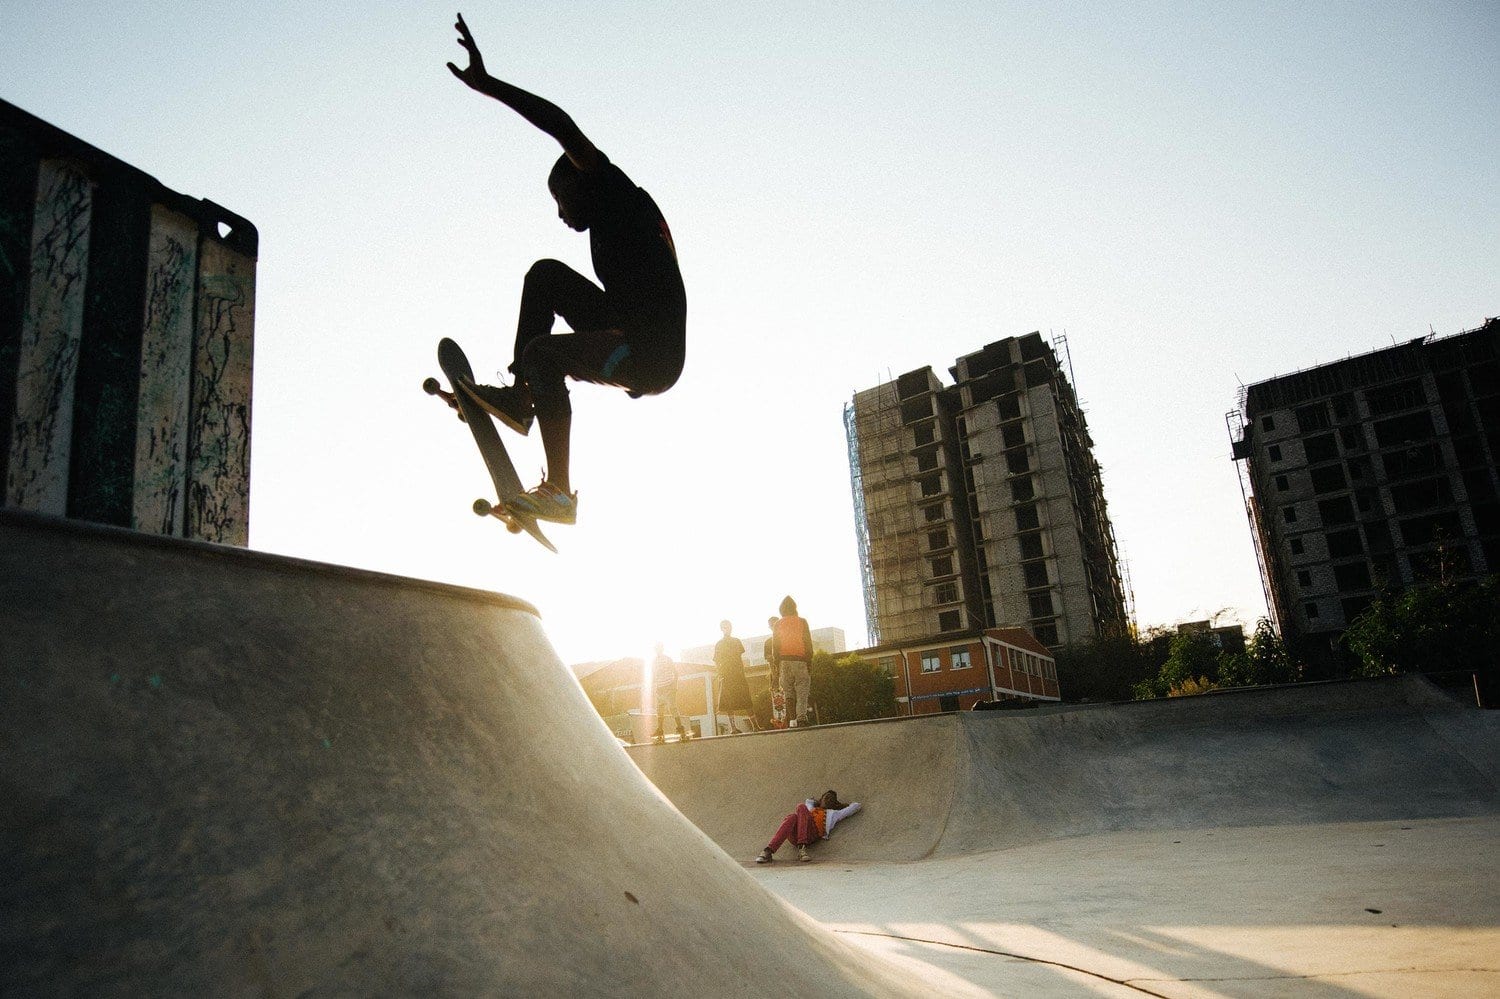 The Growing Skateboarding Culture in Ethiopia